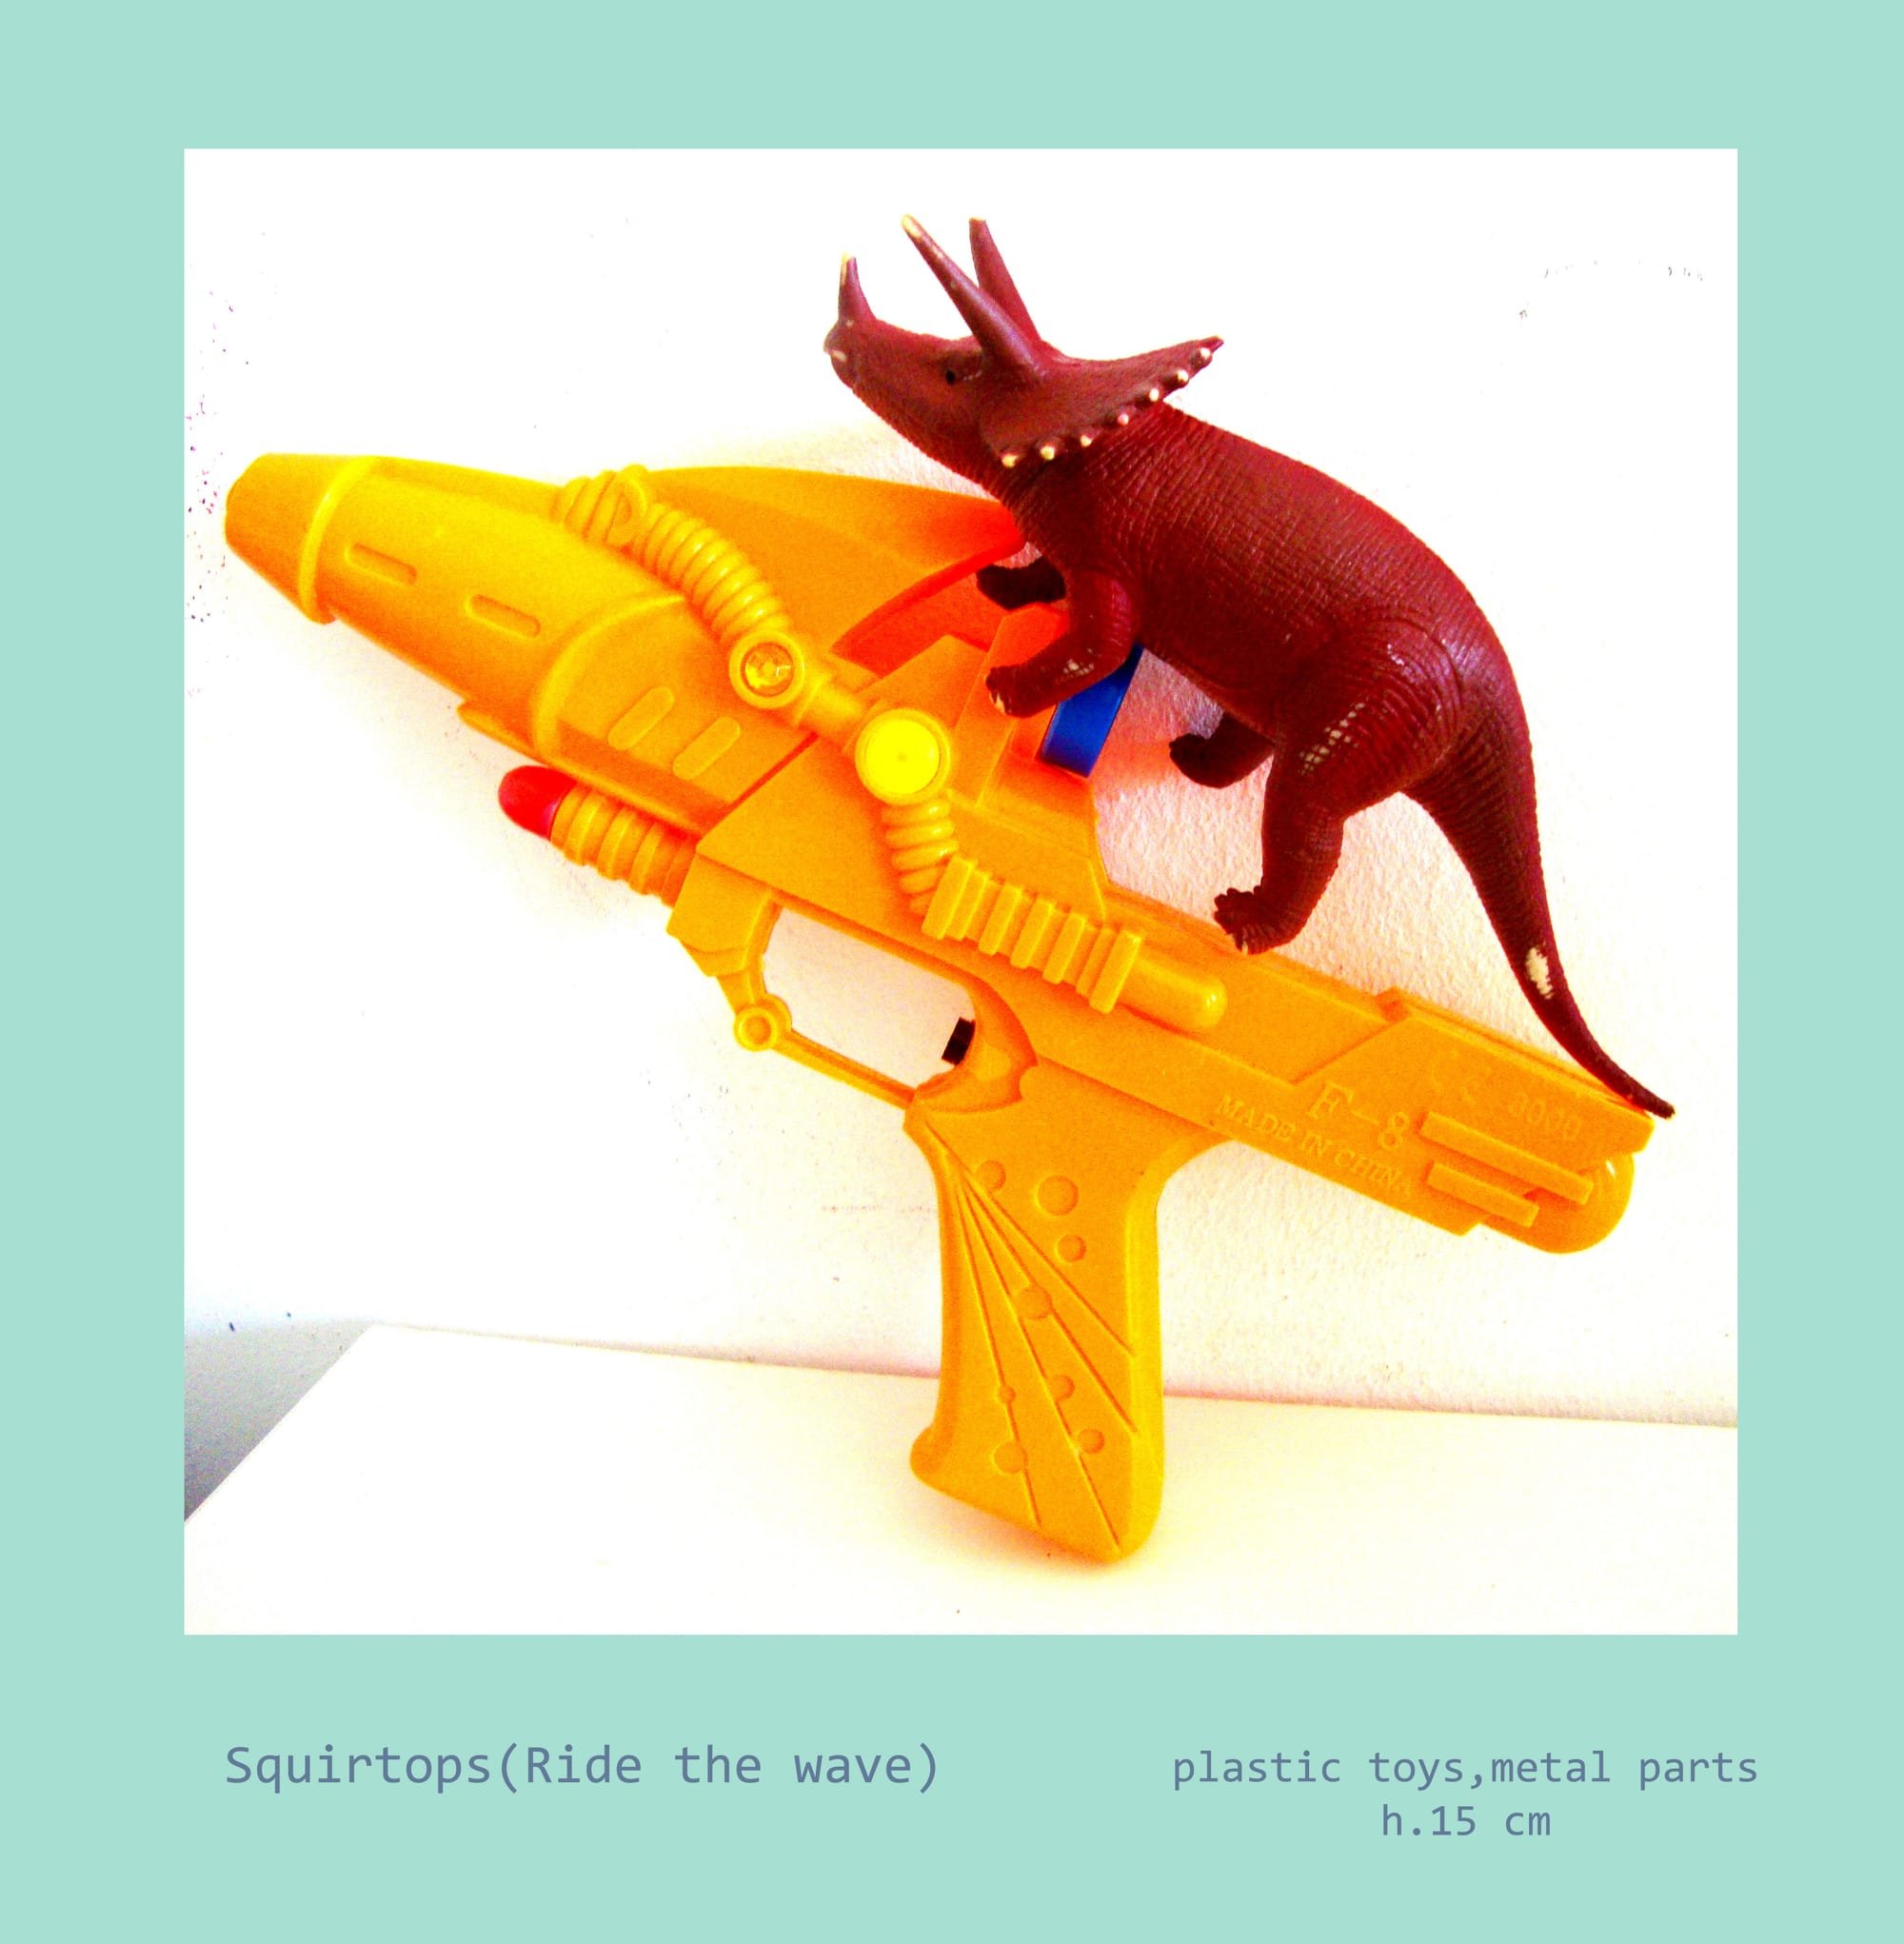 Squirtops (Ride the wave)